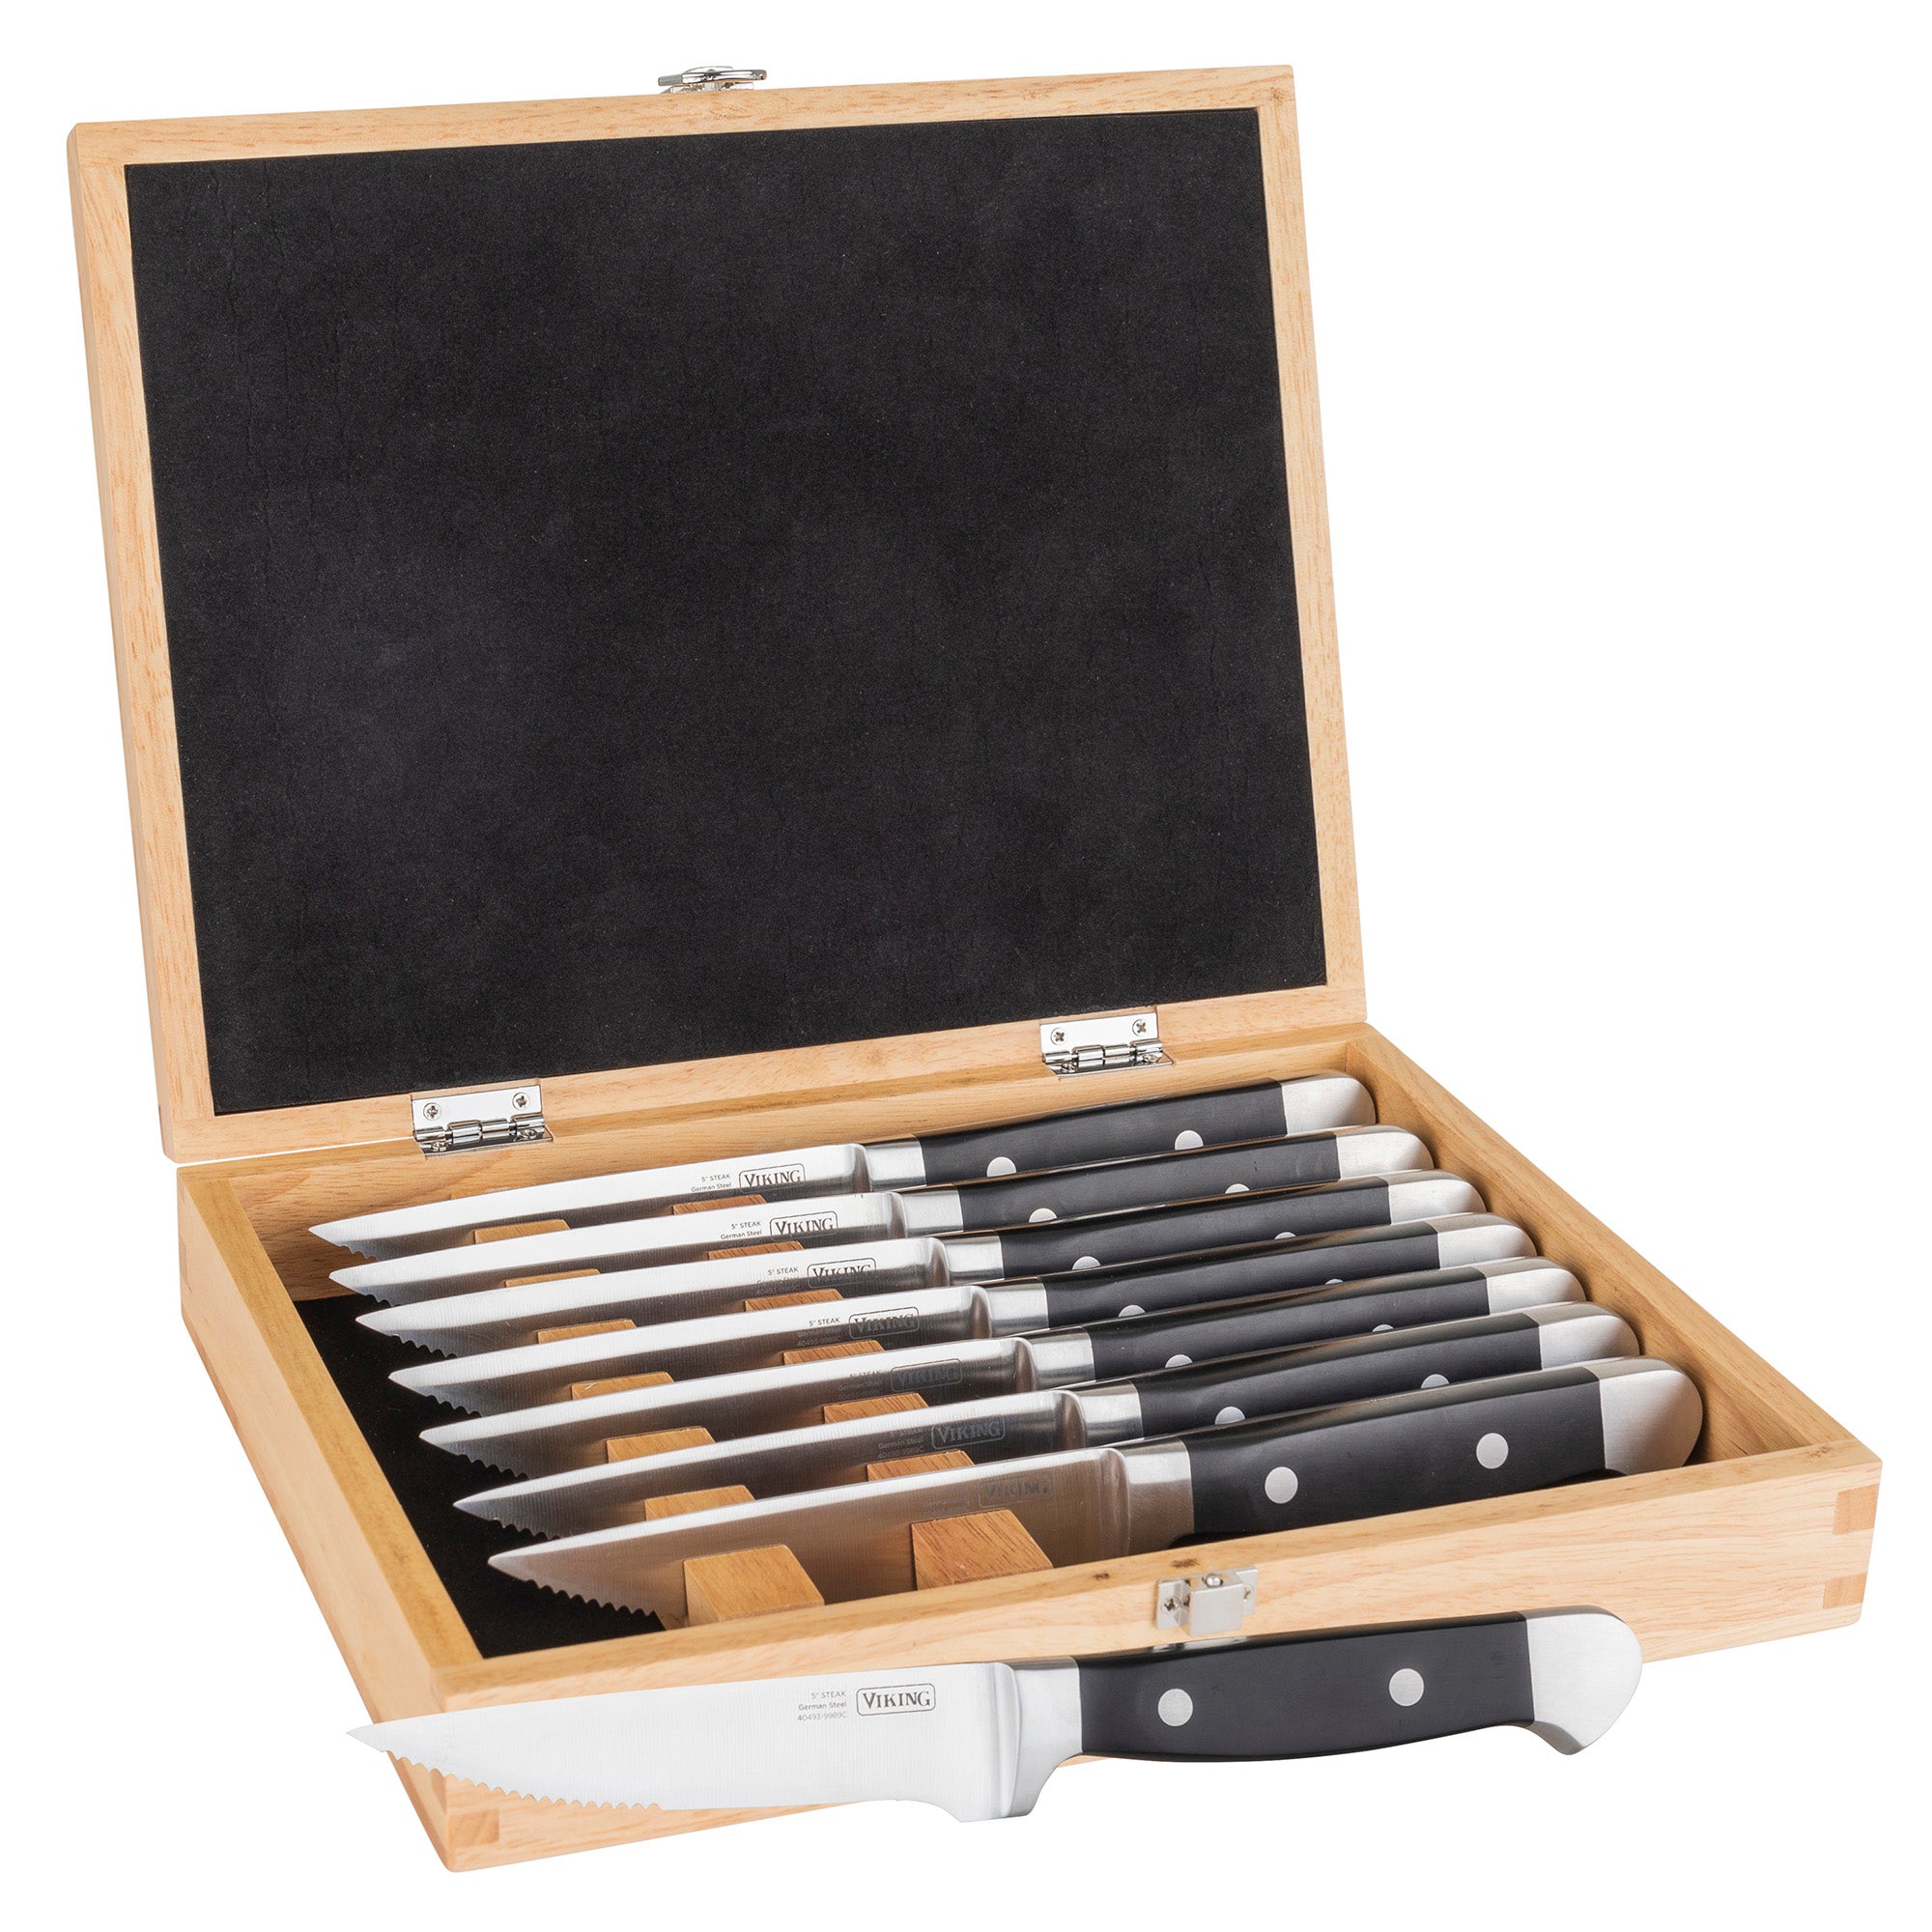  Viking Culinary German Stainless Steel Pakkawood Steak Knife Set,  6 Piece, Includes Wooden Gift Box, Handwash Only, Water & Stain Resistant  Handles, Black: Home & Kitchen